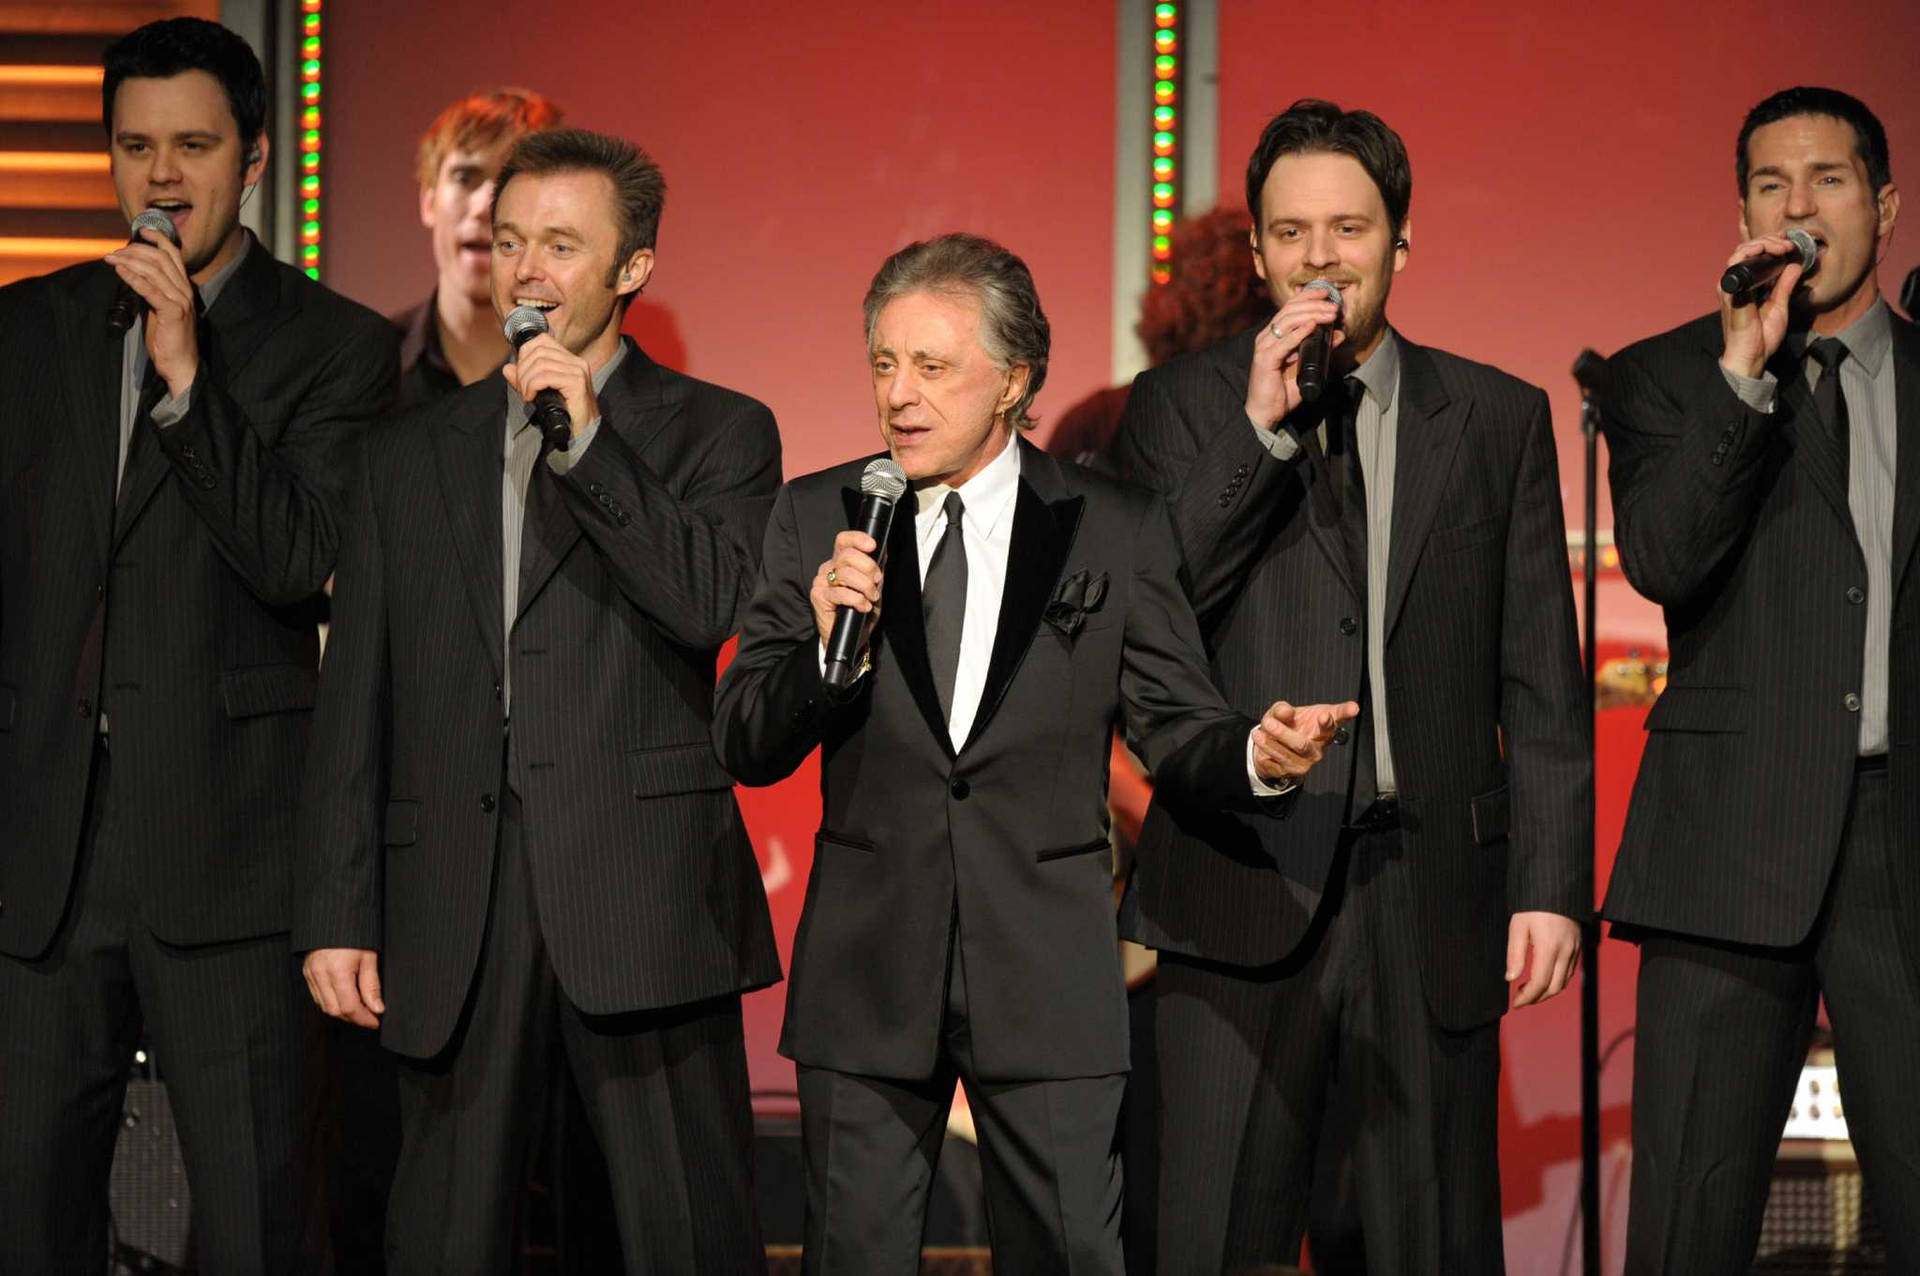 Audio Frankie Valli And The Four Seasons Wallpaper